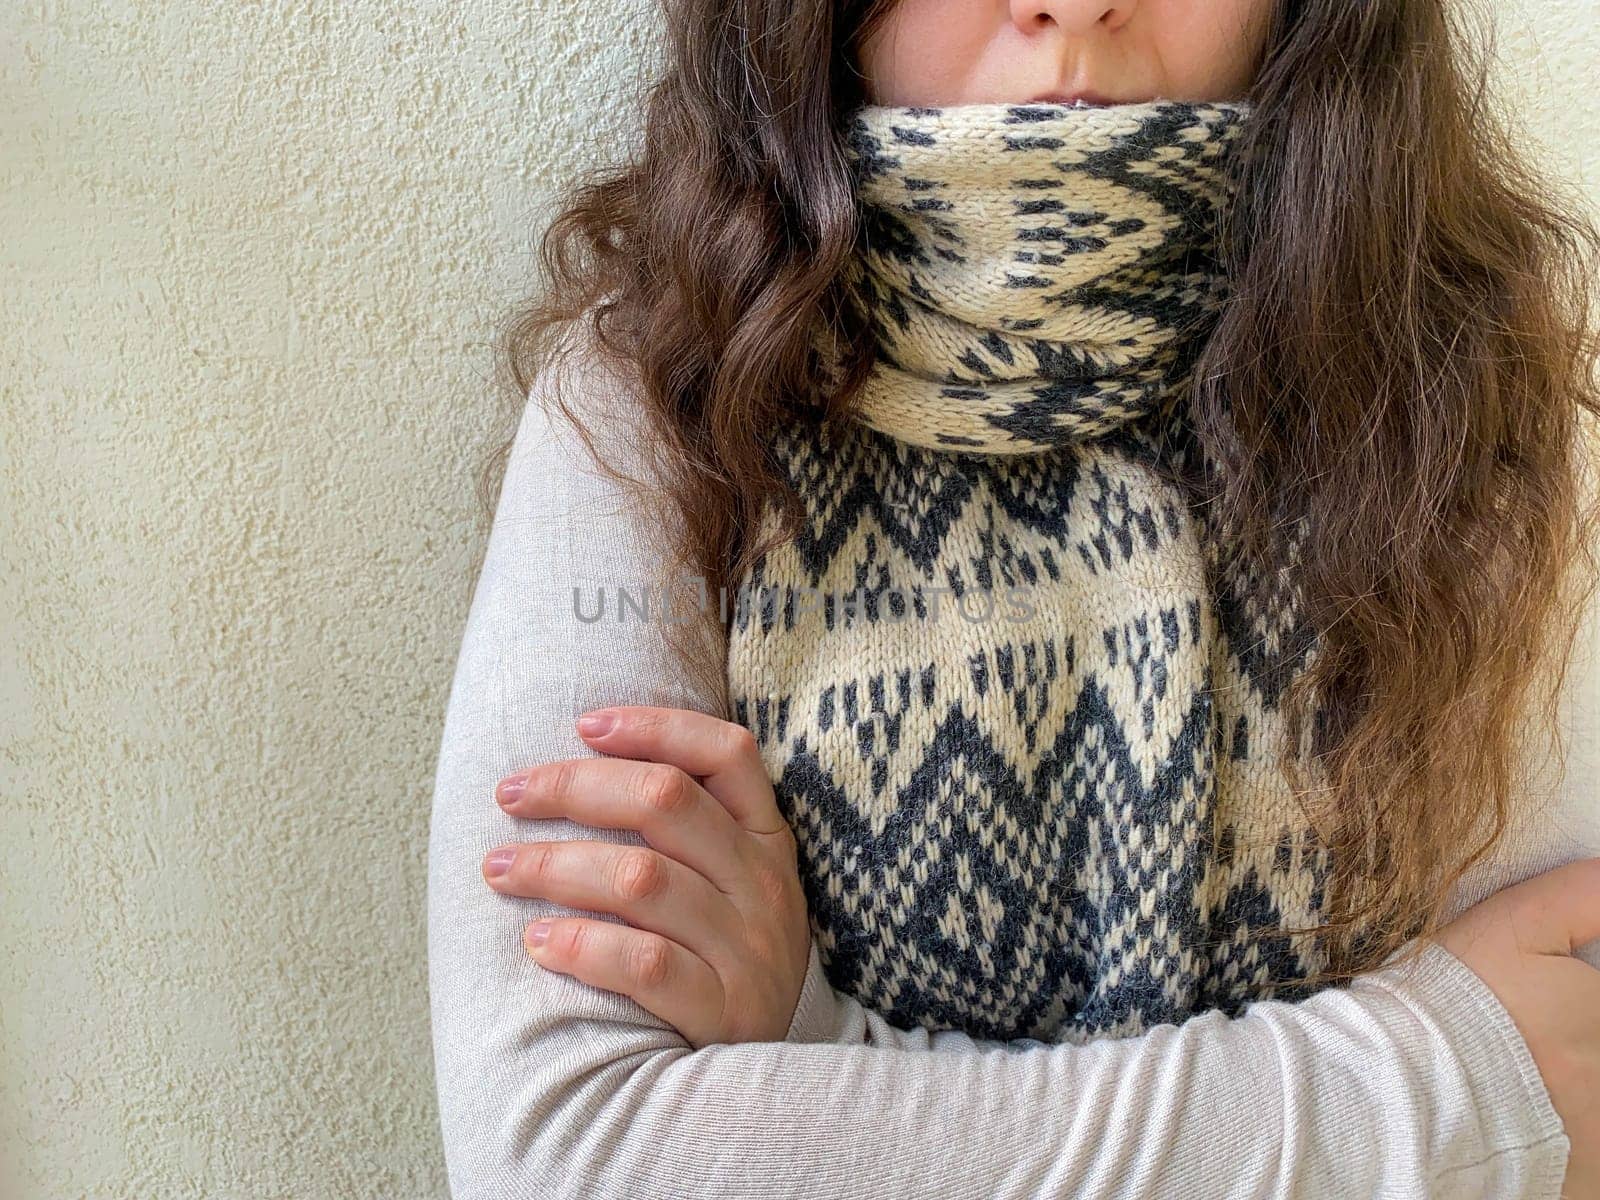 Woman in scarf and turtleneck, cold weather, no heating. Young woman with curly dark hair wearing a turtleneck and scarf.